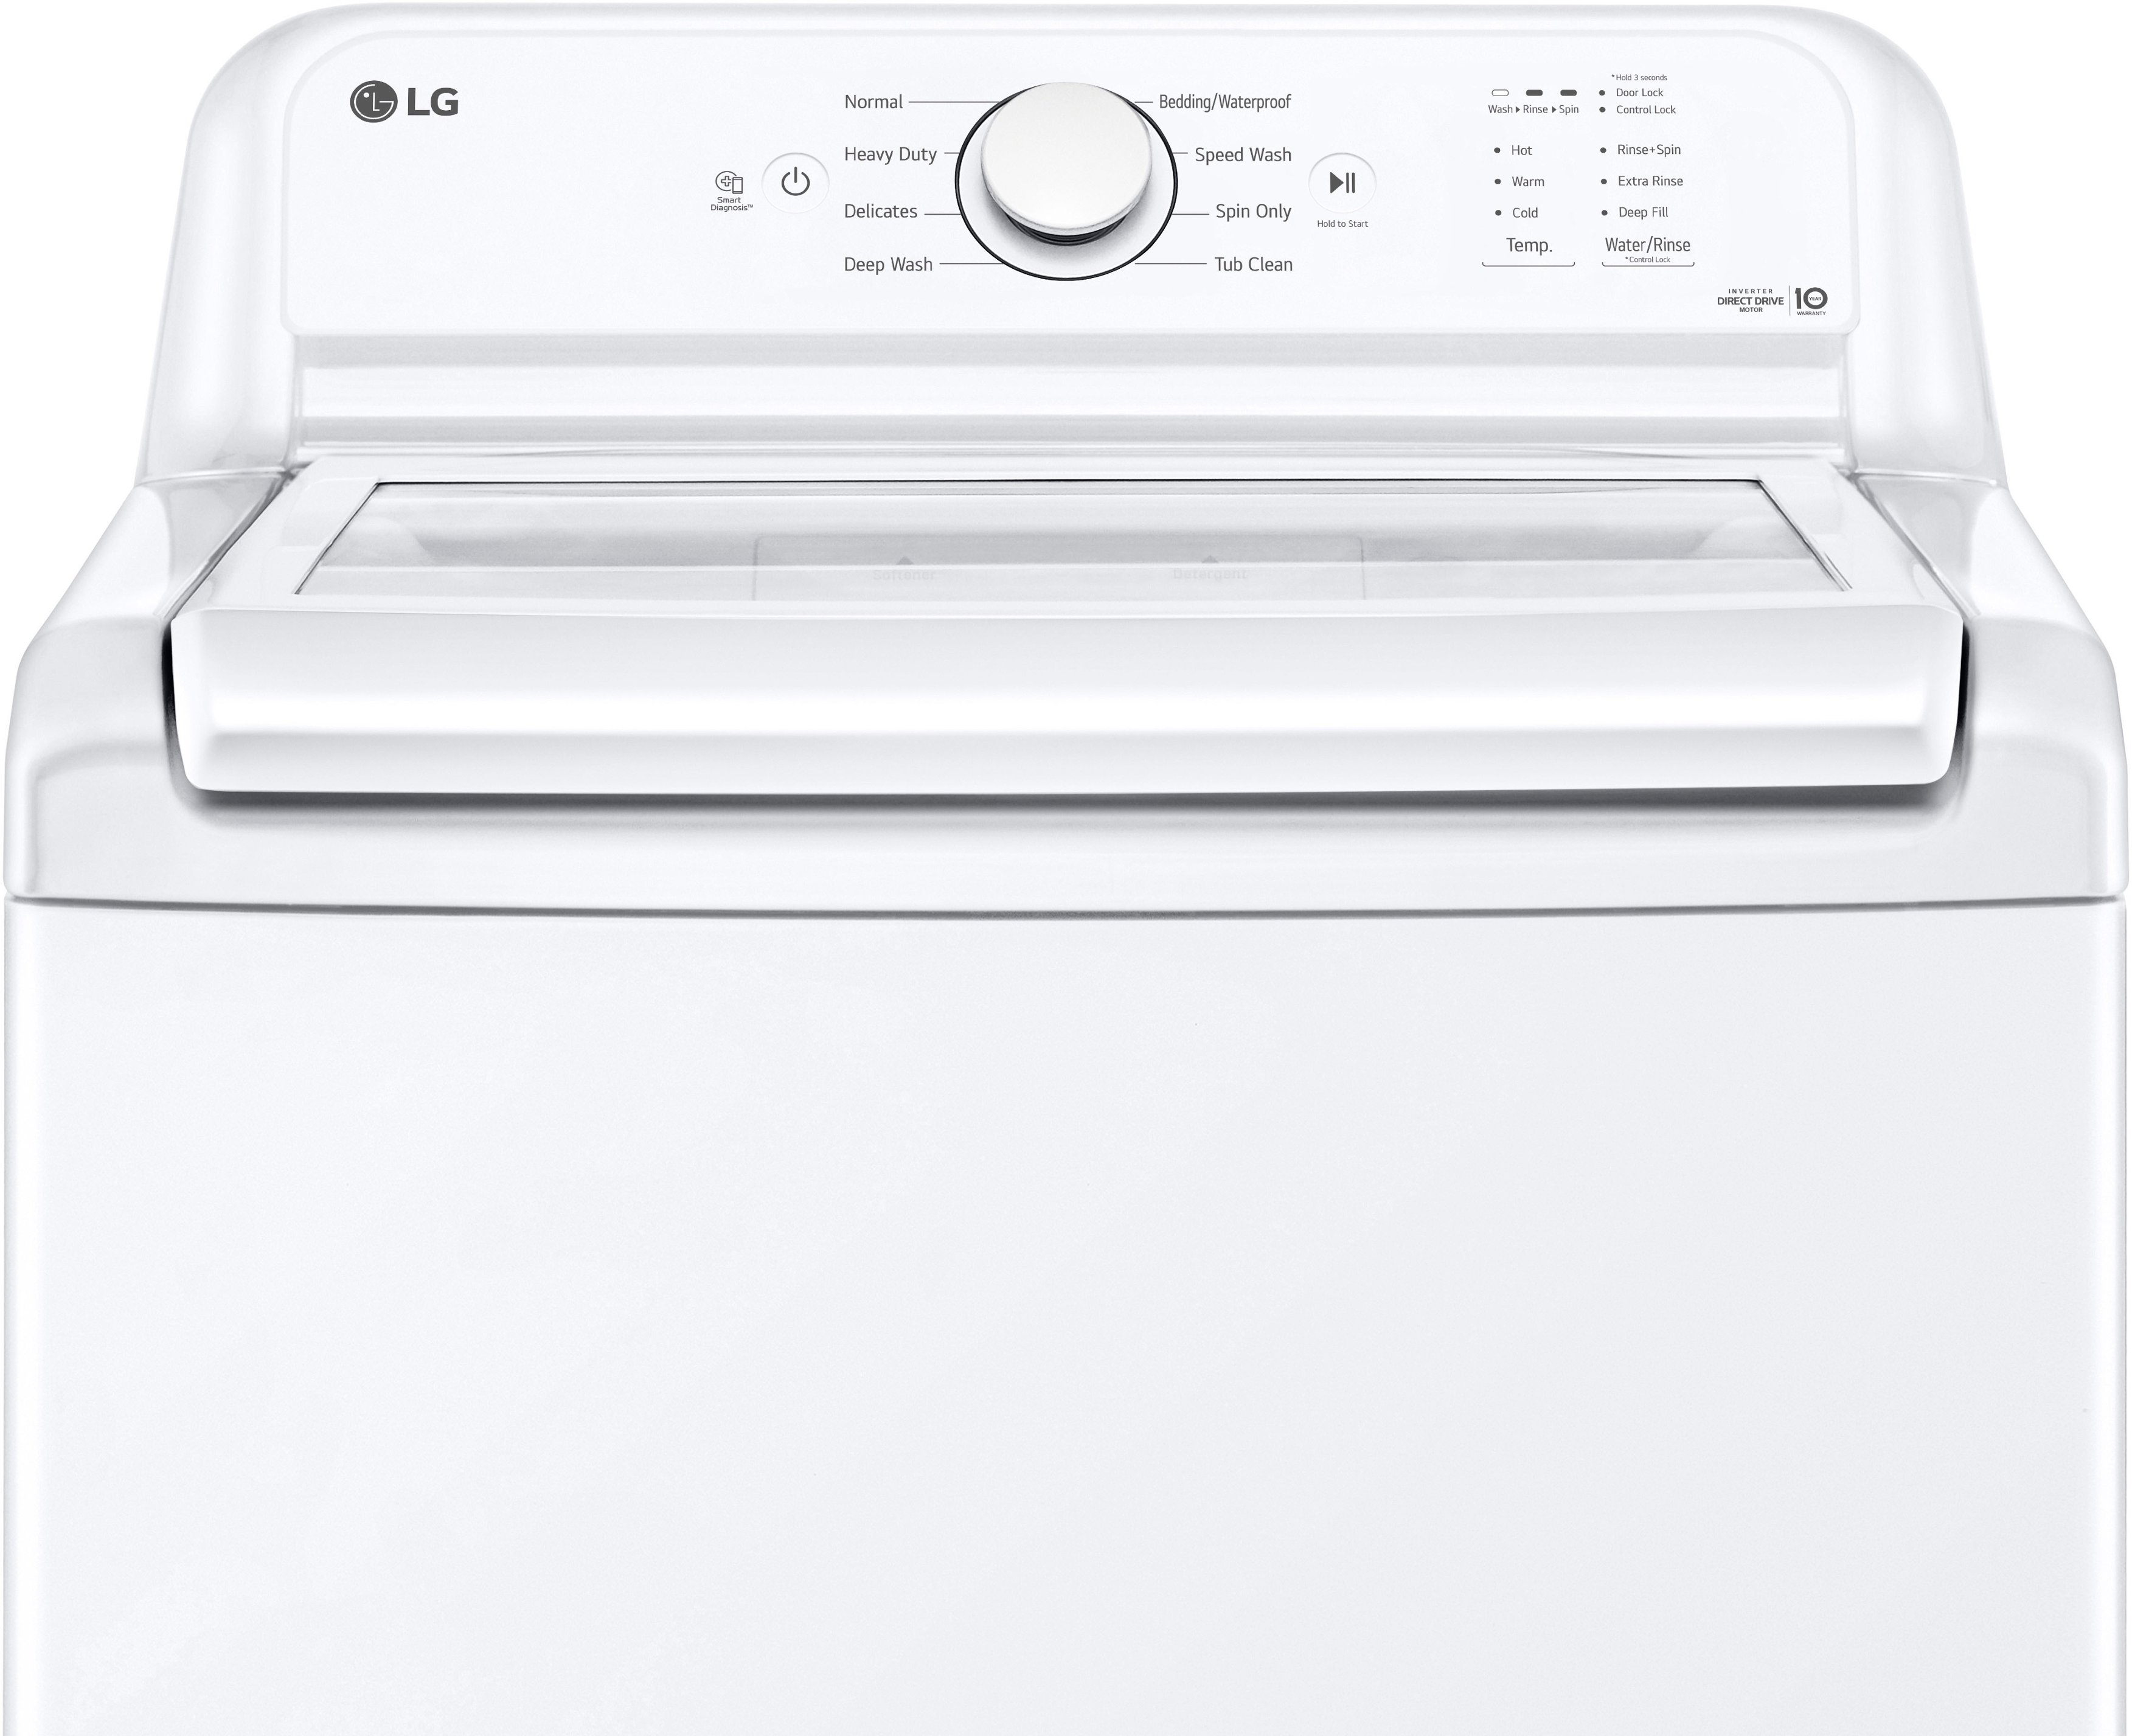 LG 4.1 Load Washer Cu. Ft. Best WT6105CW Glass - with White Top Buy Lid SlamProof